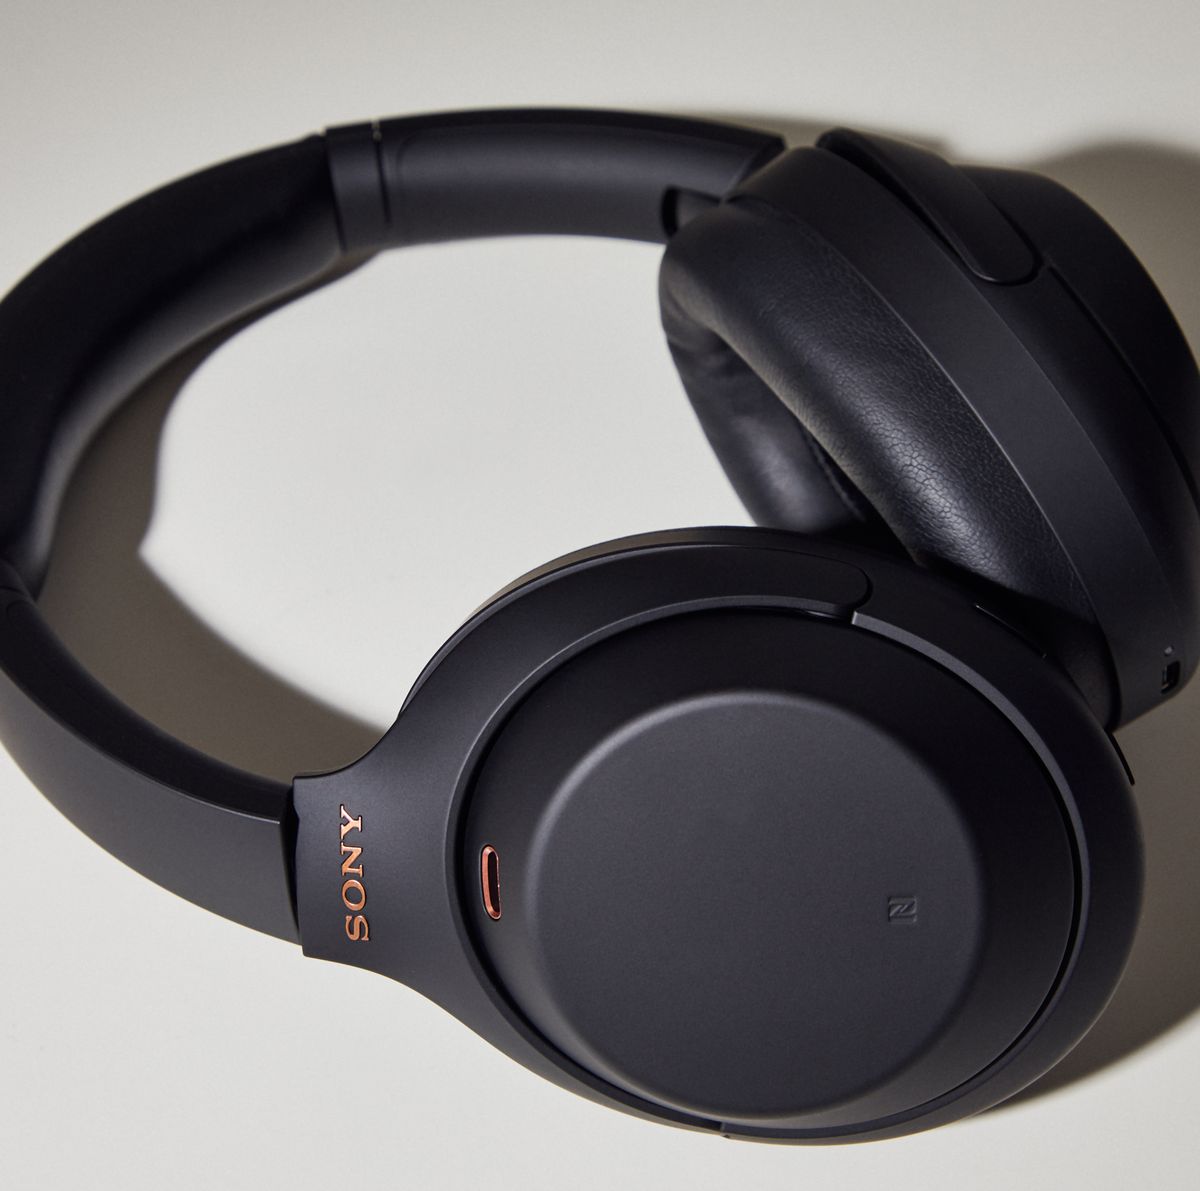 Sony WH-1000XM4  Why You Should STILL Buy Them 4 Years Later